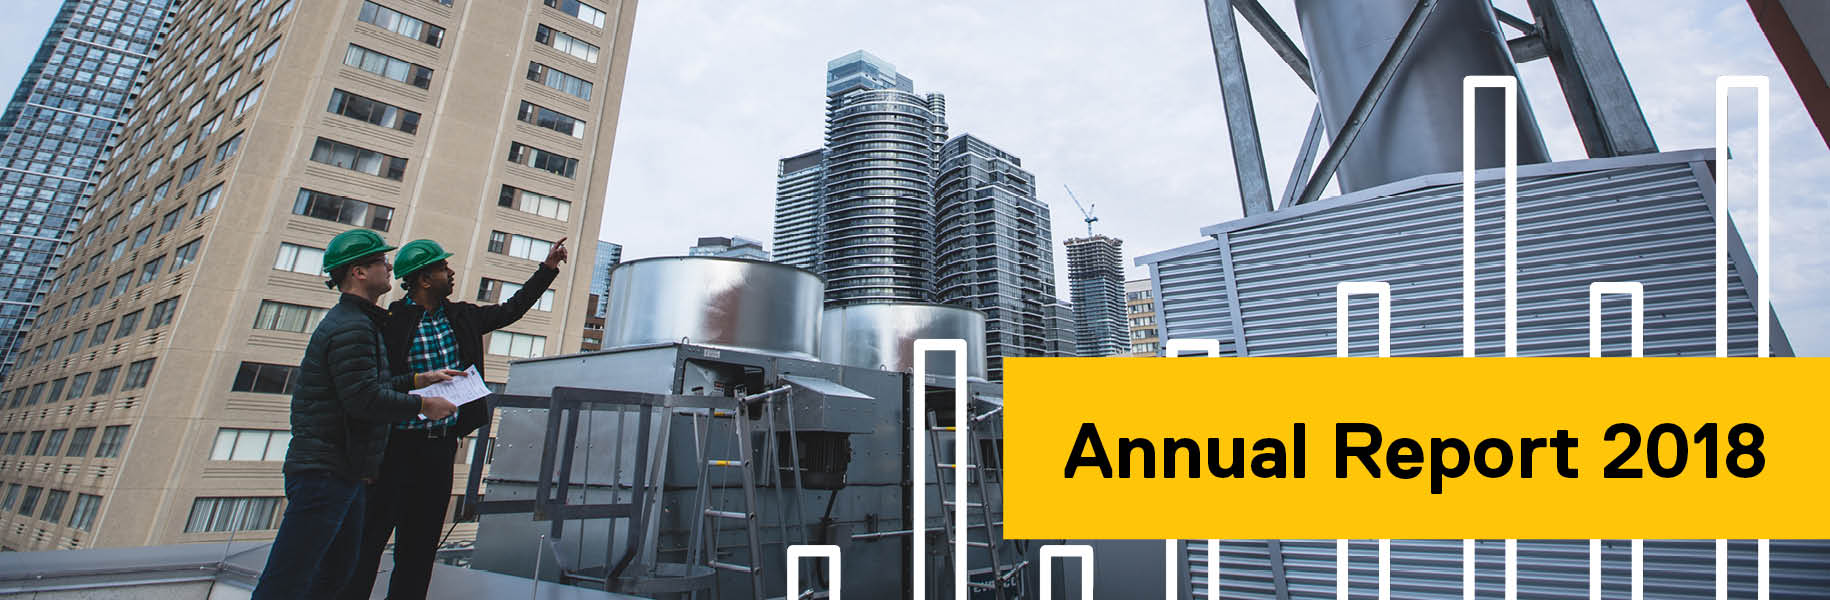 Annual Report 2018: Two members of the Environmental Health and Safety team inspecting a fume hood on the roof of a Ryerson building